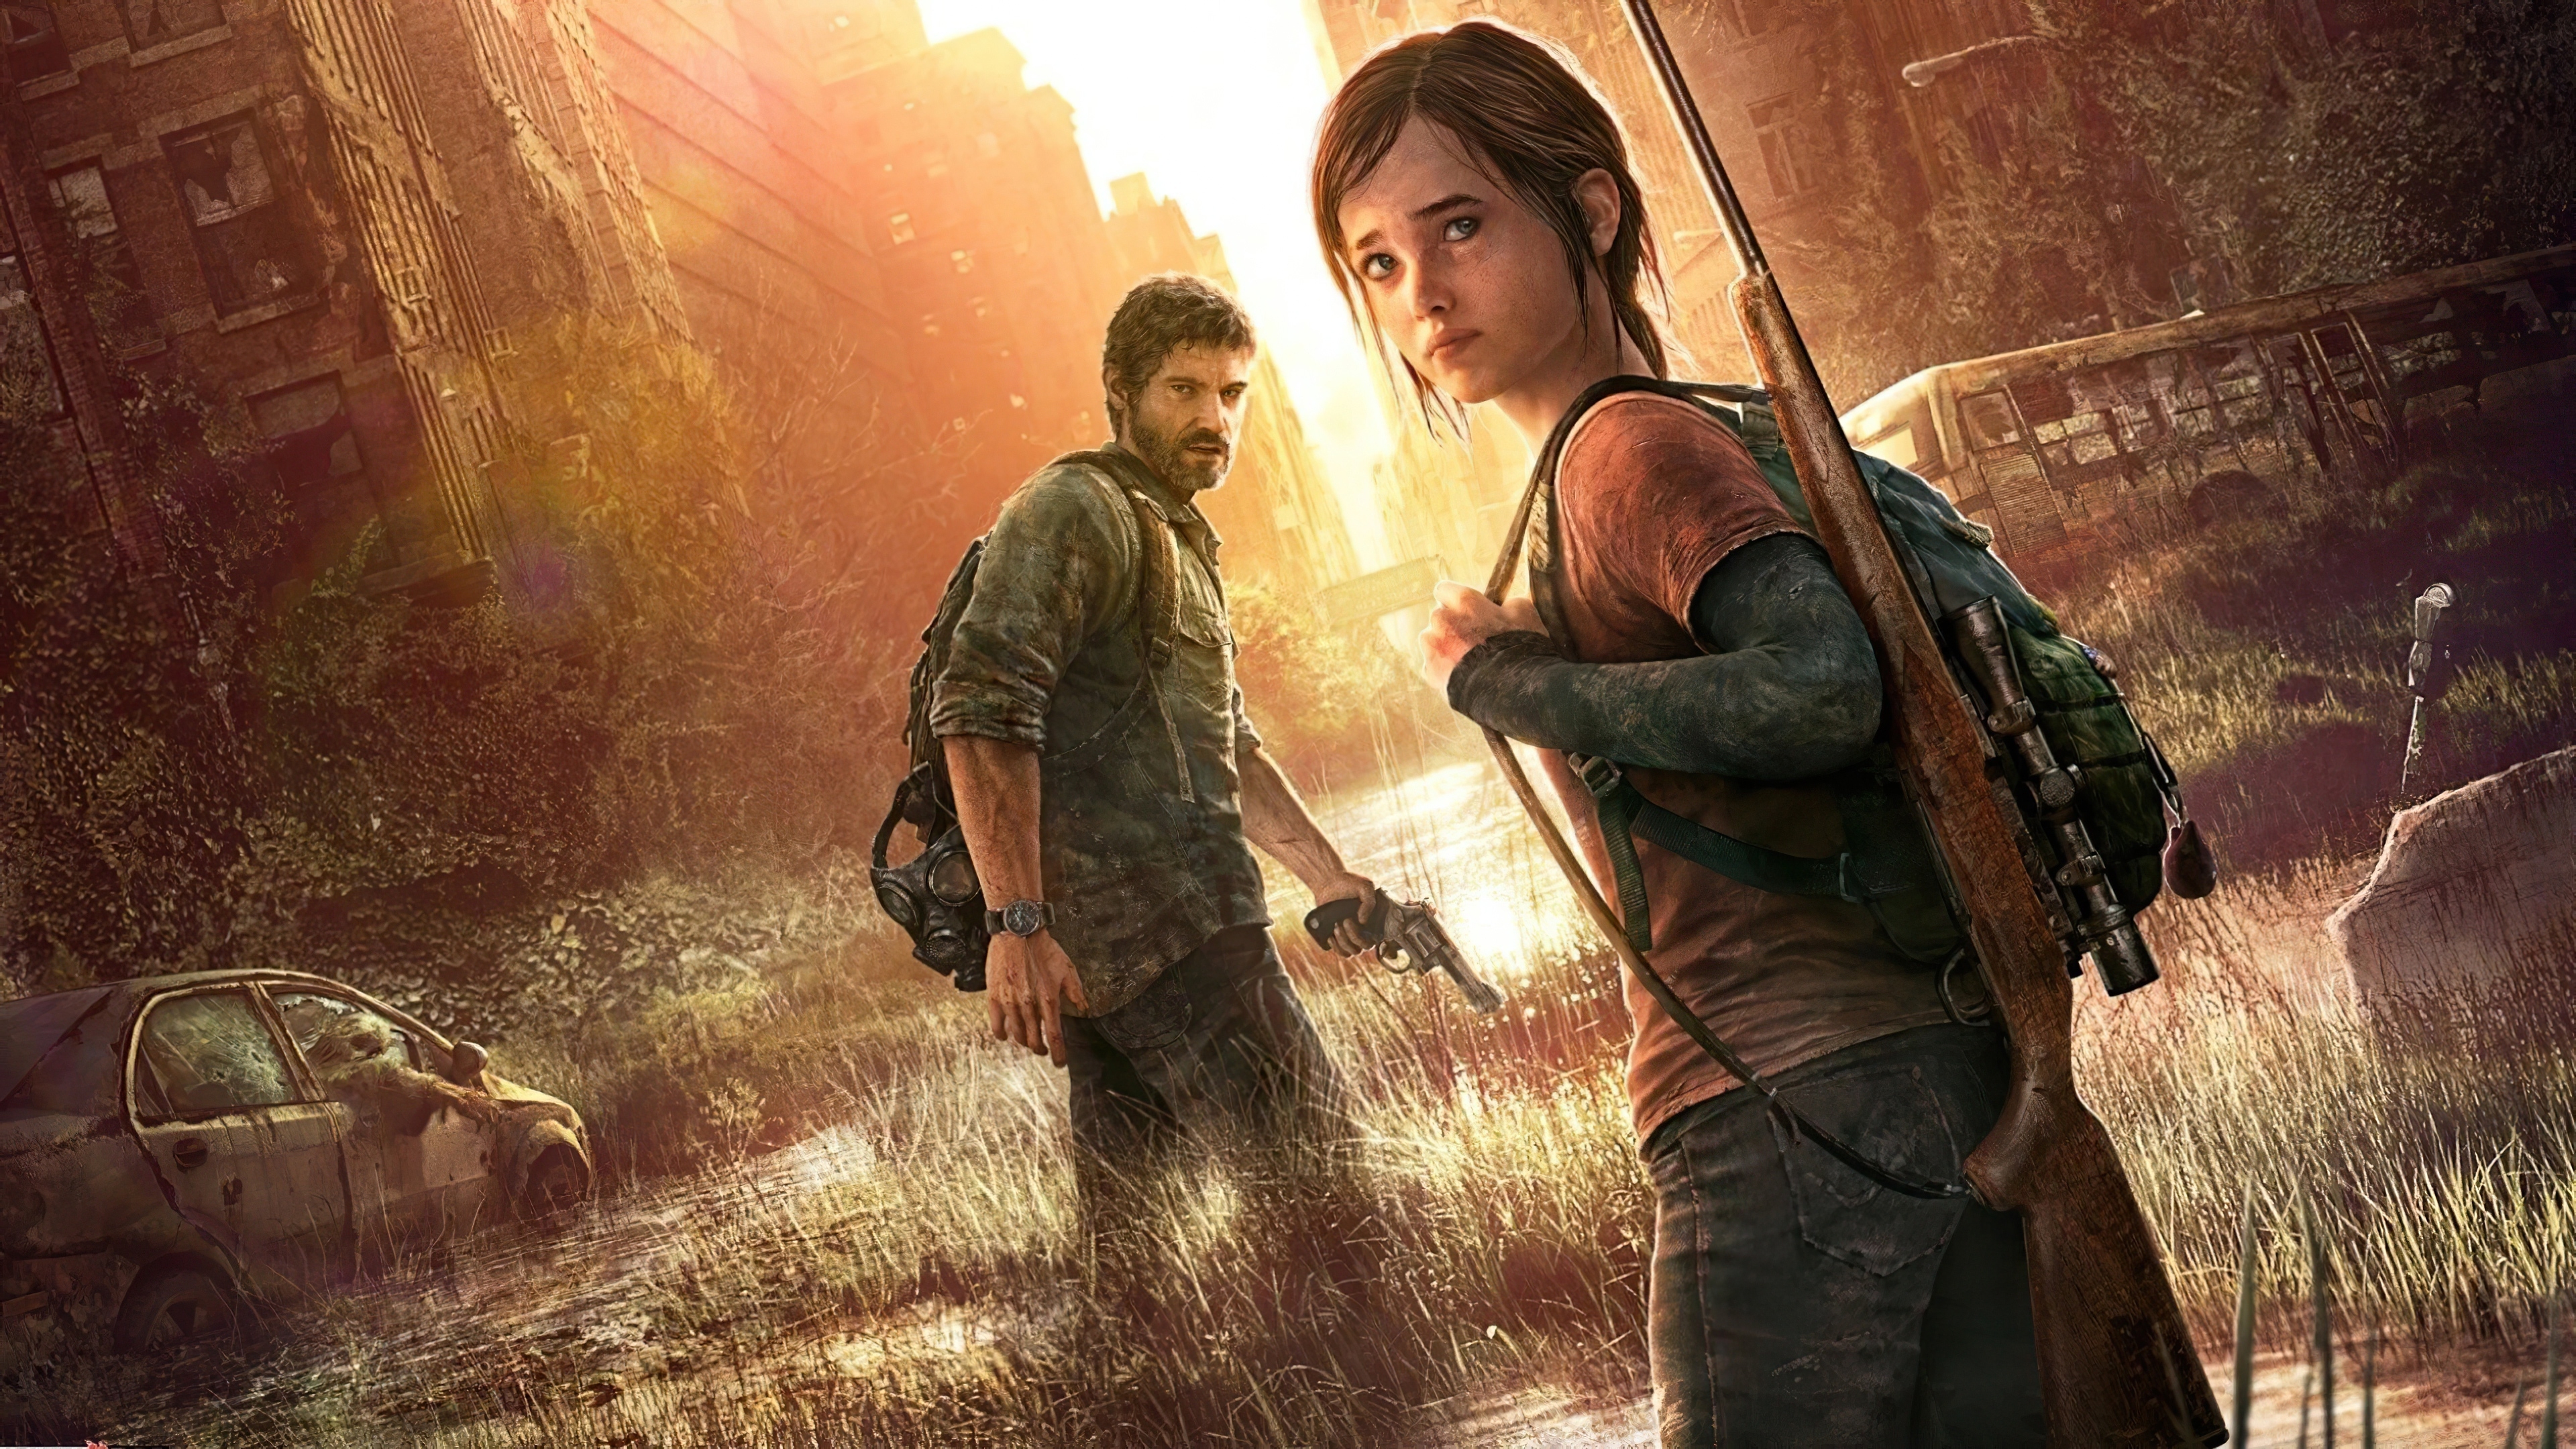 Wallpaper The Last Of Us, Ellie And Joel, Action Games:3840x2160